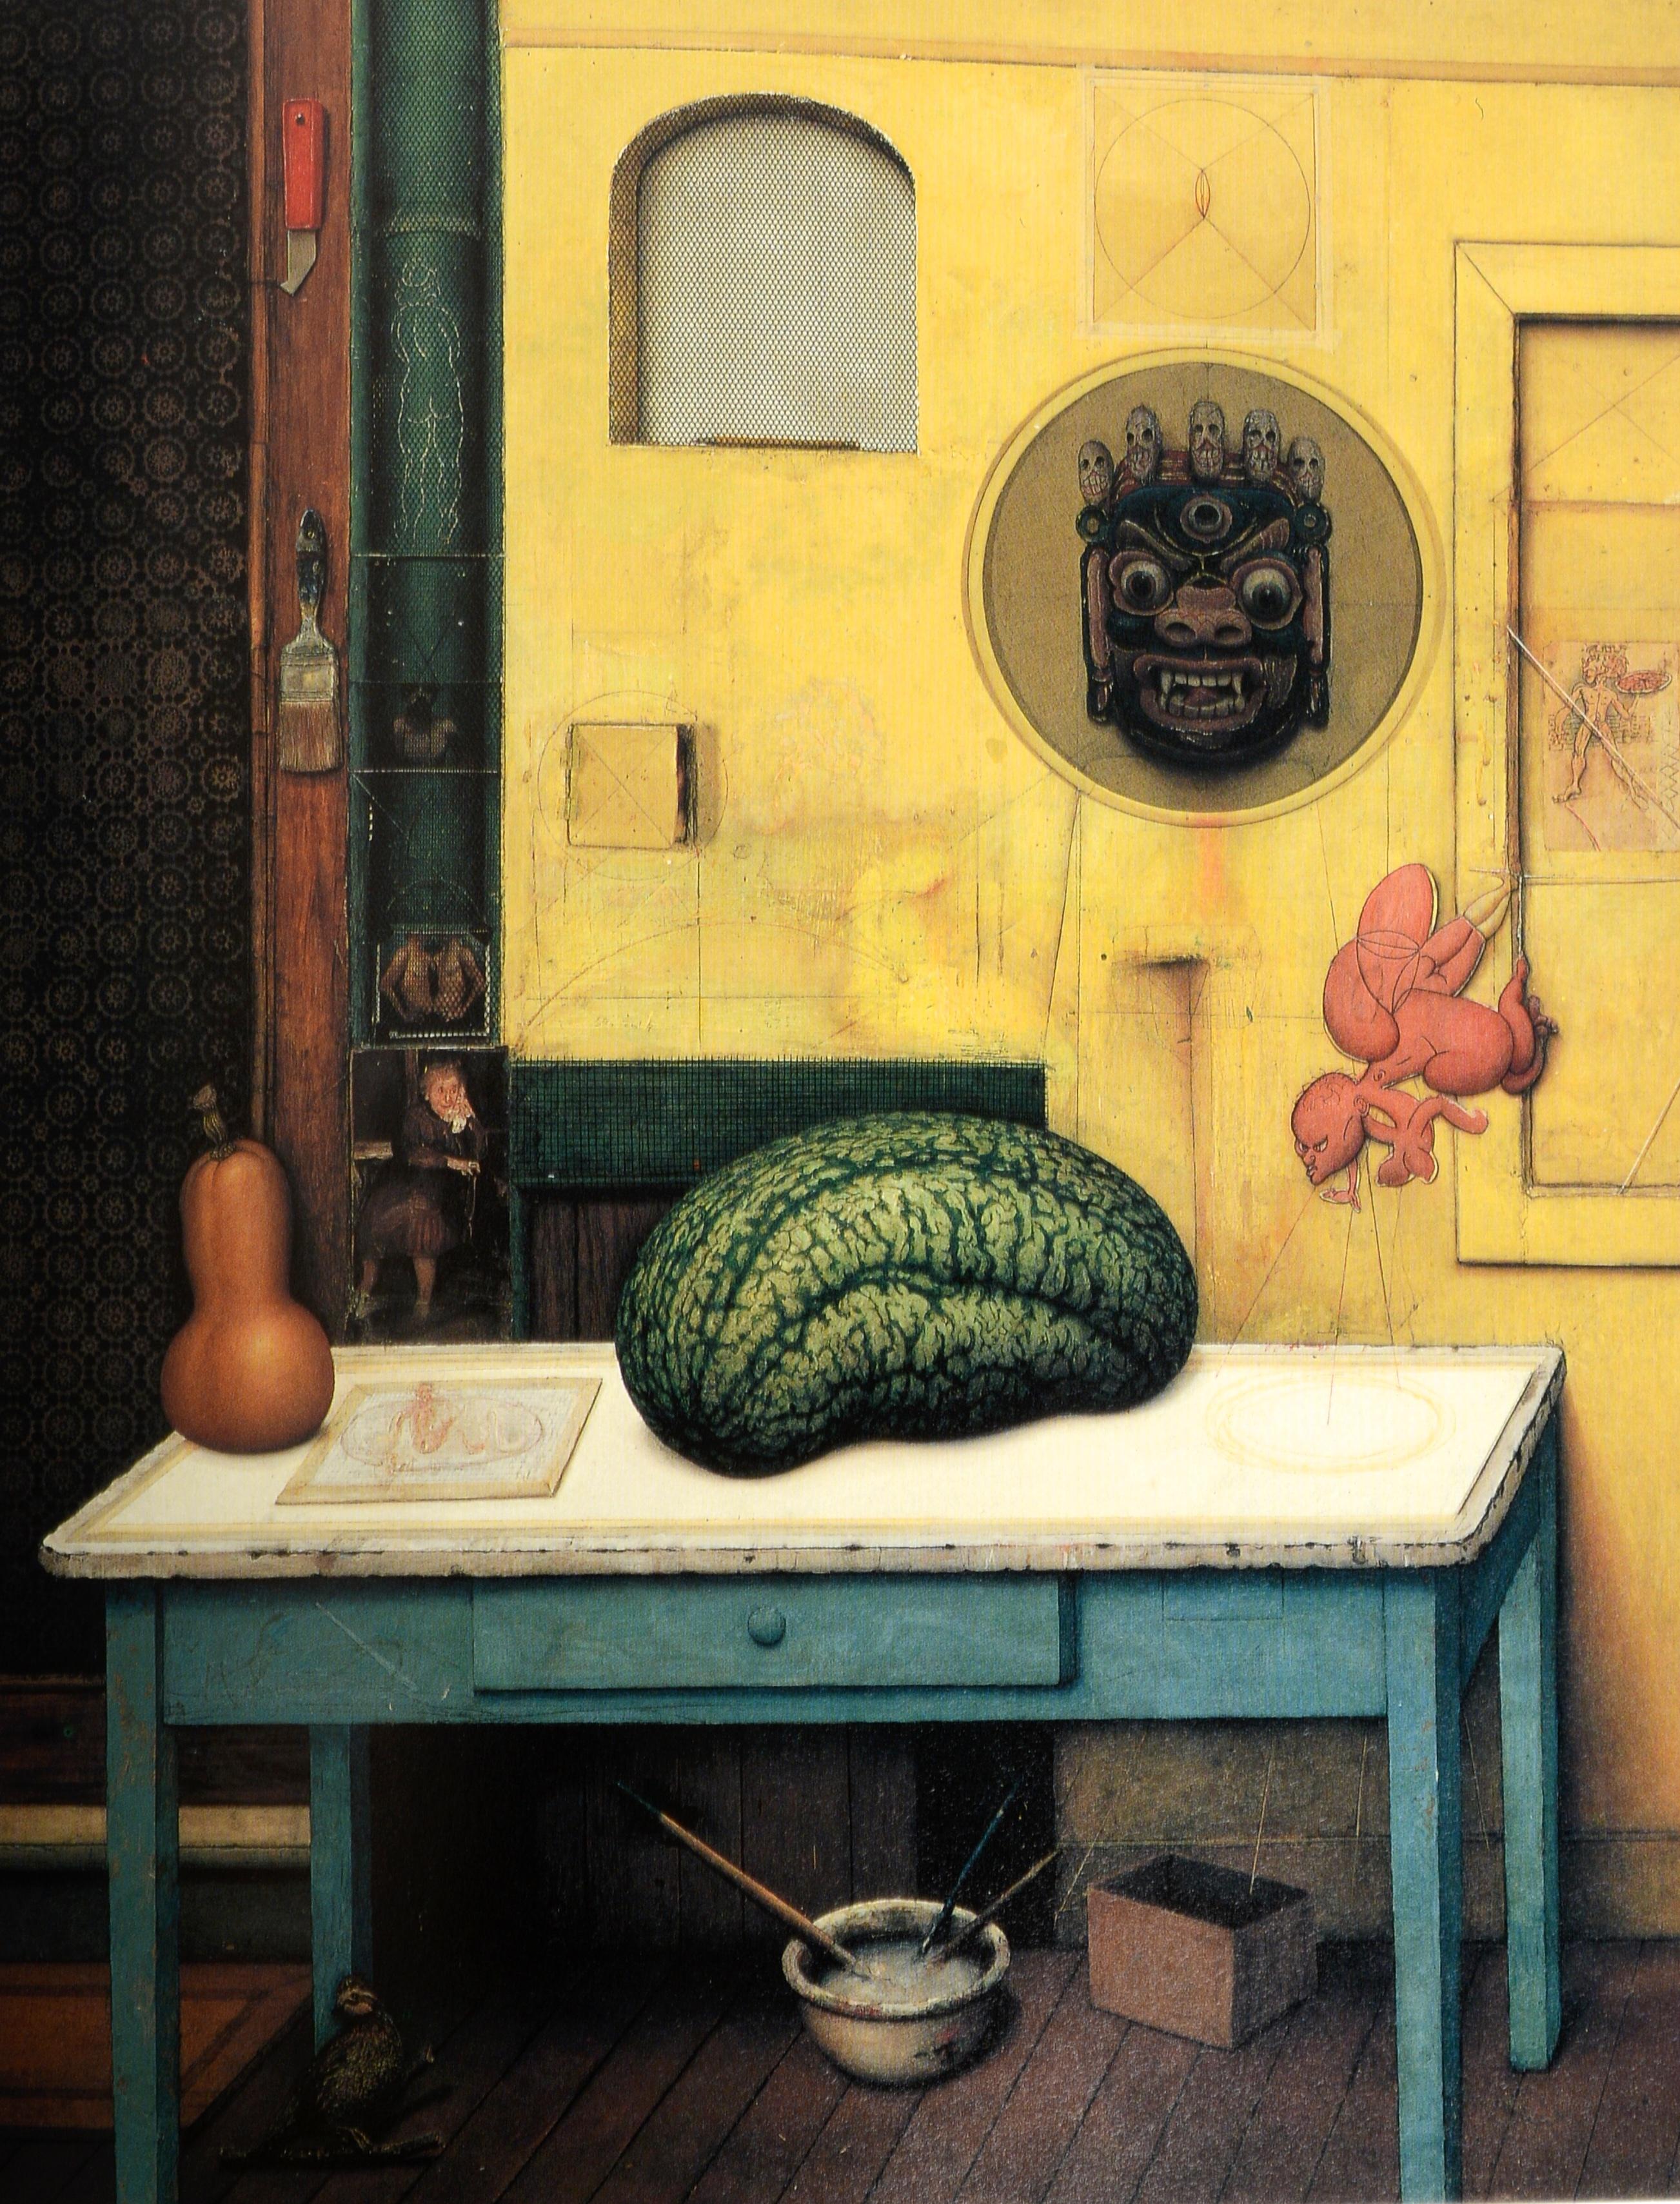 American Selections from the Permanent Collection of the San Diego Museum of Contemporary